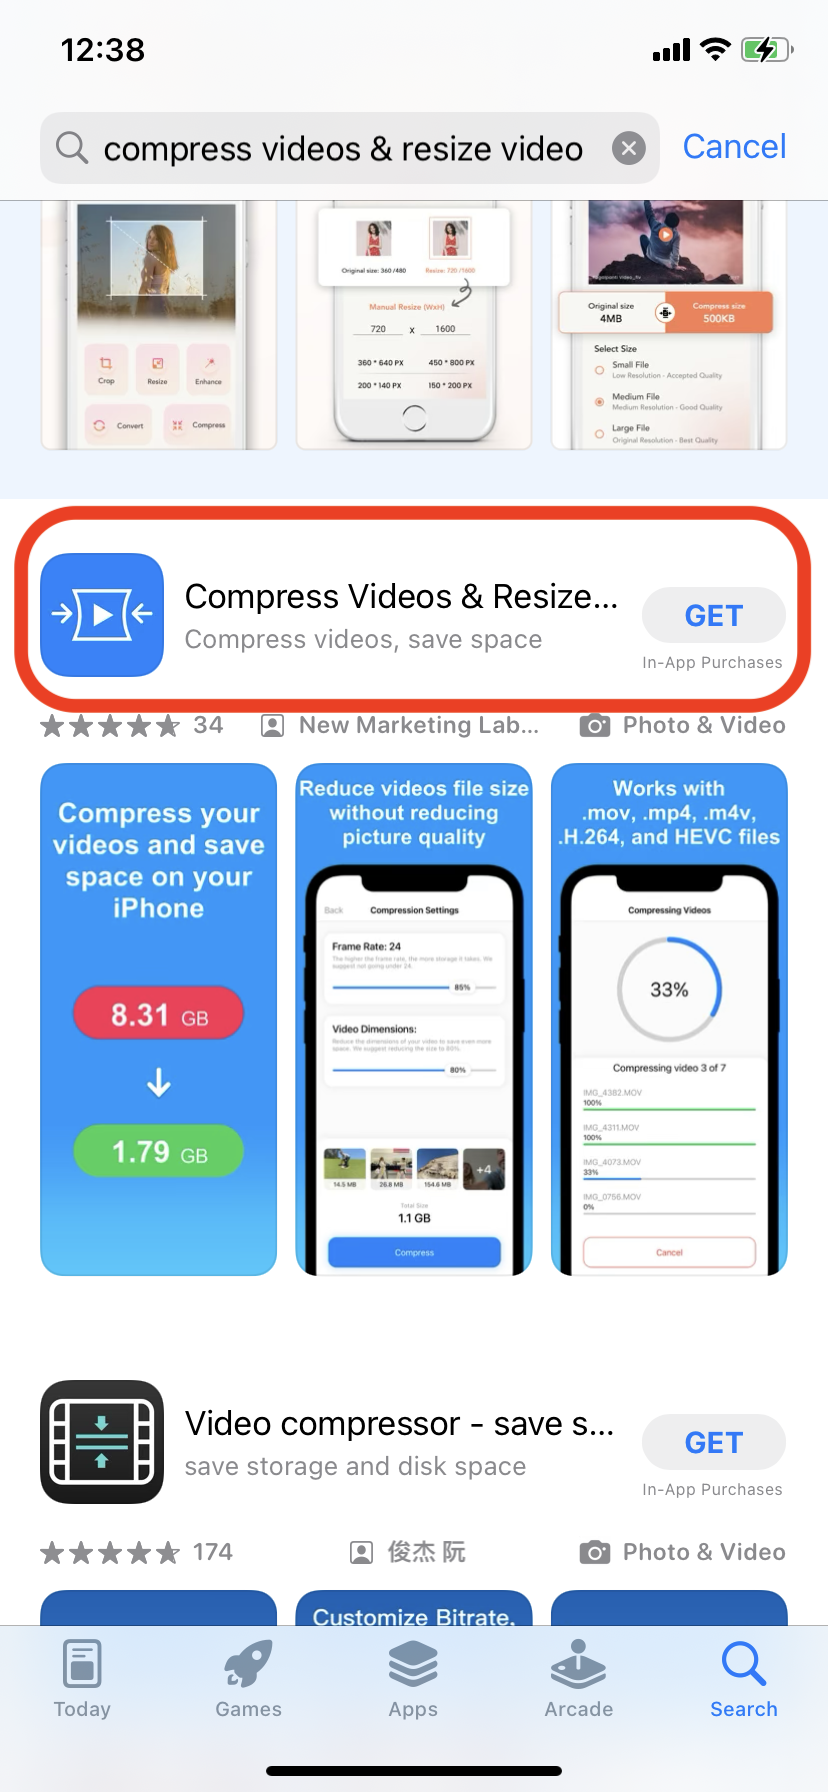 How To Use a Third-Party App: Compress Videos & Resize Video: Step 1